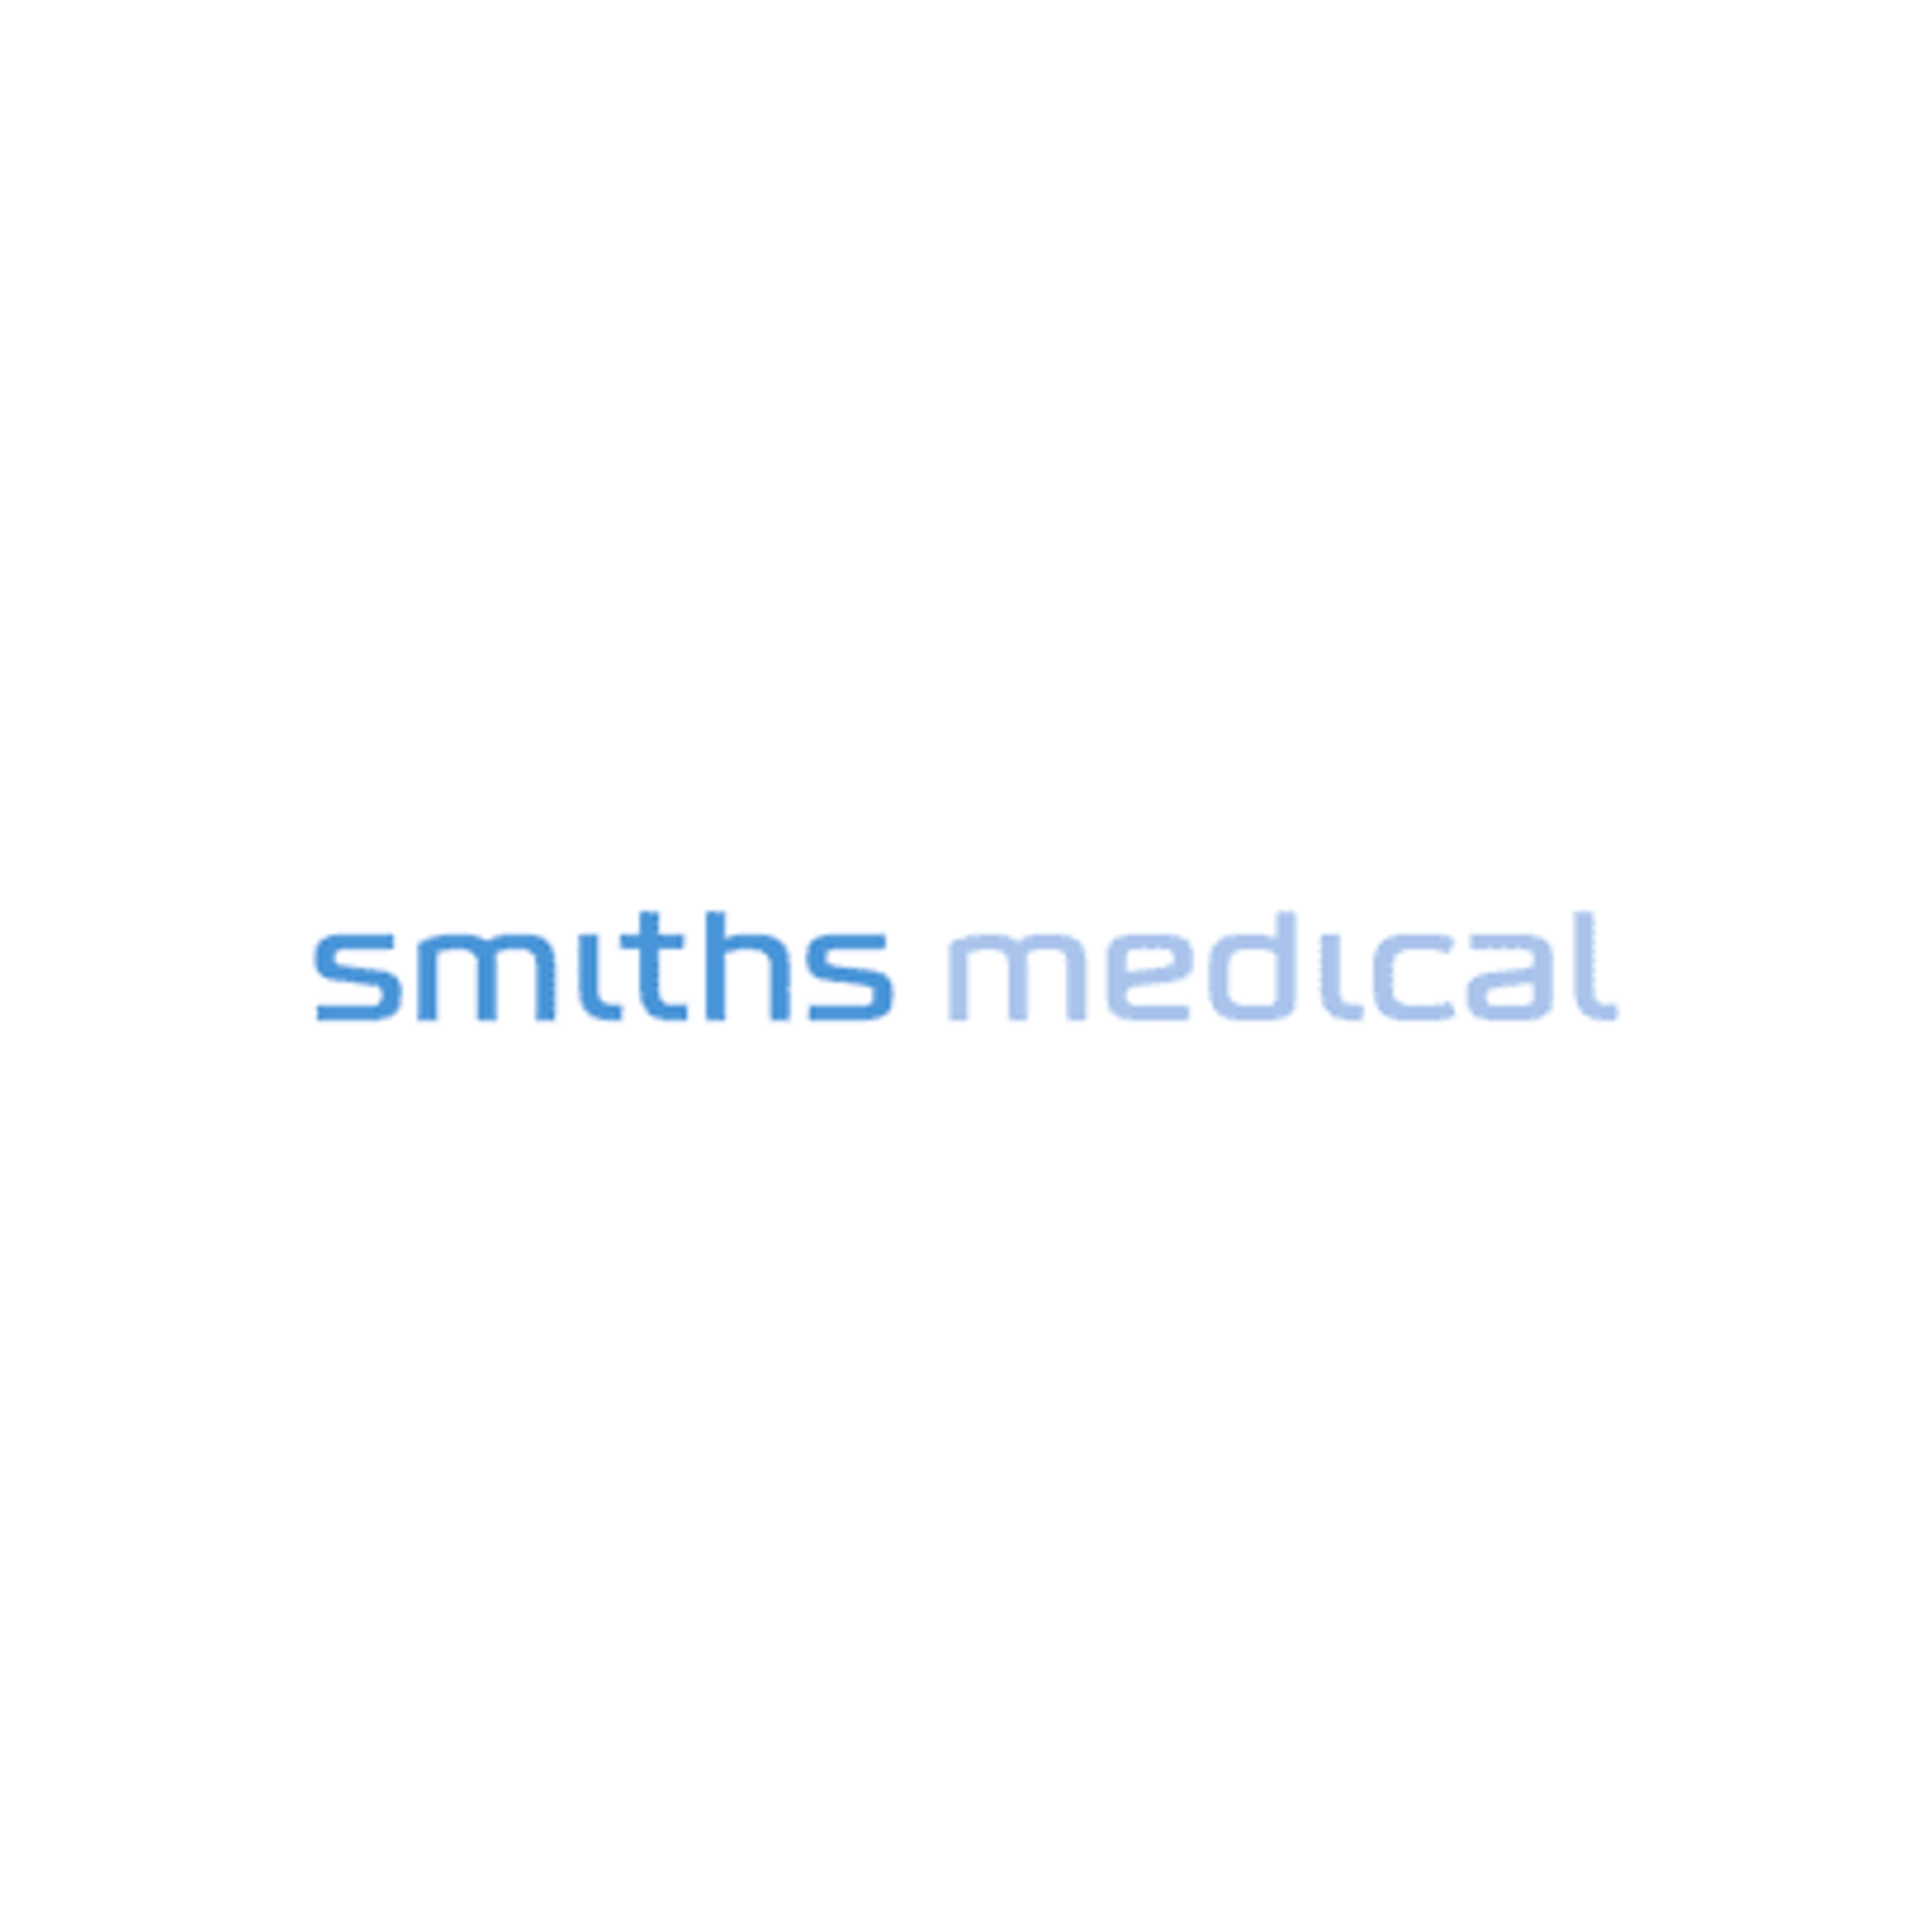 Equiptrack includes Smiths Medical equipment